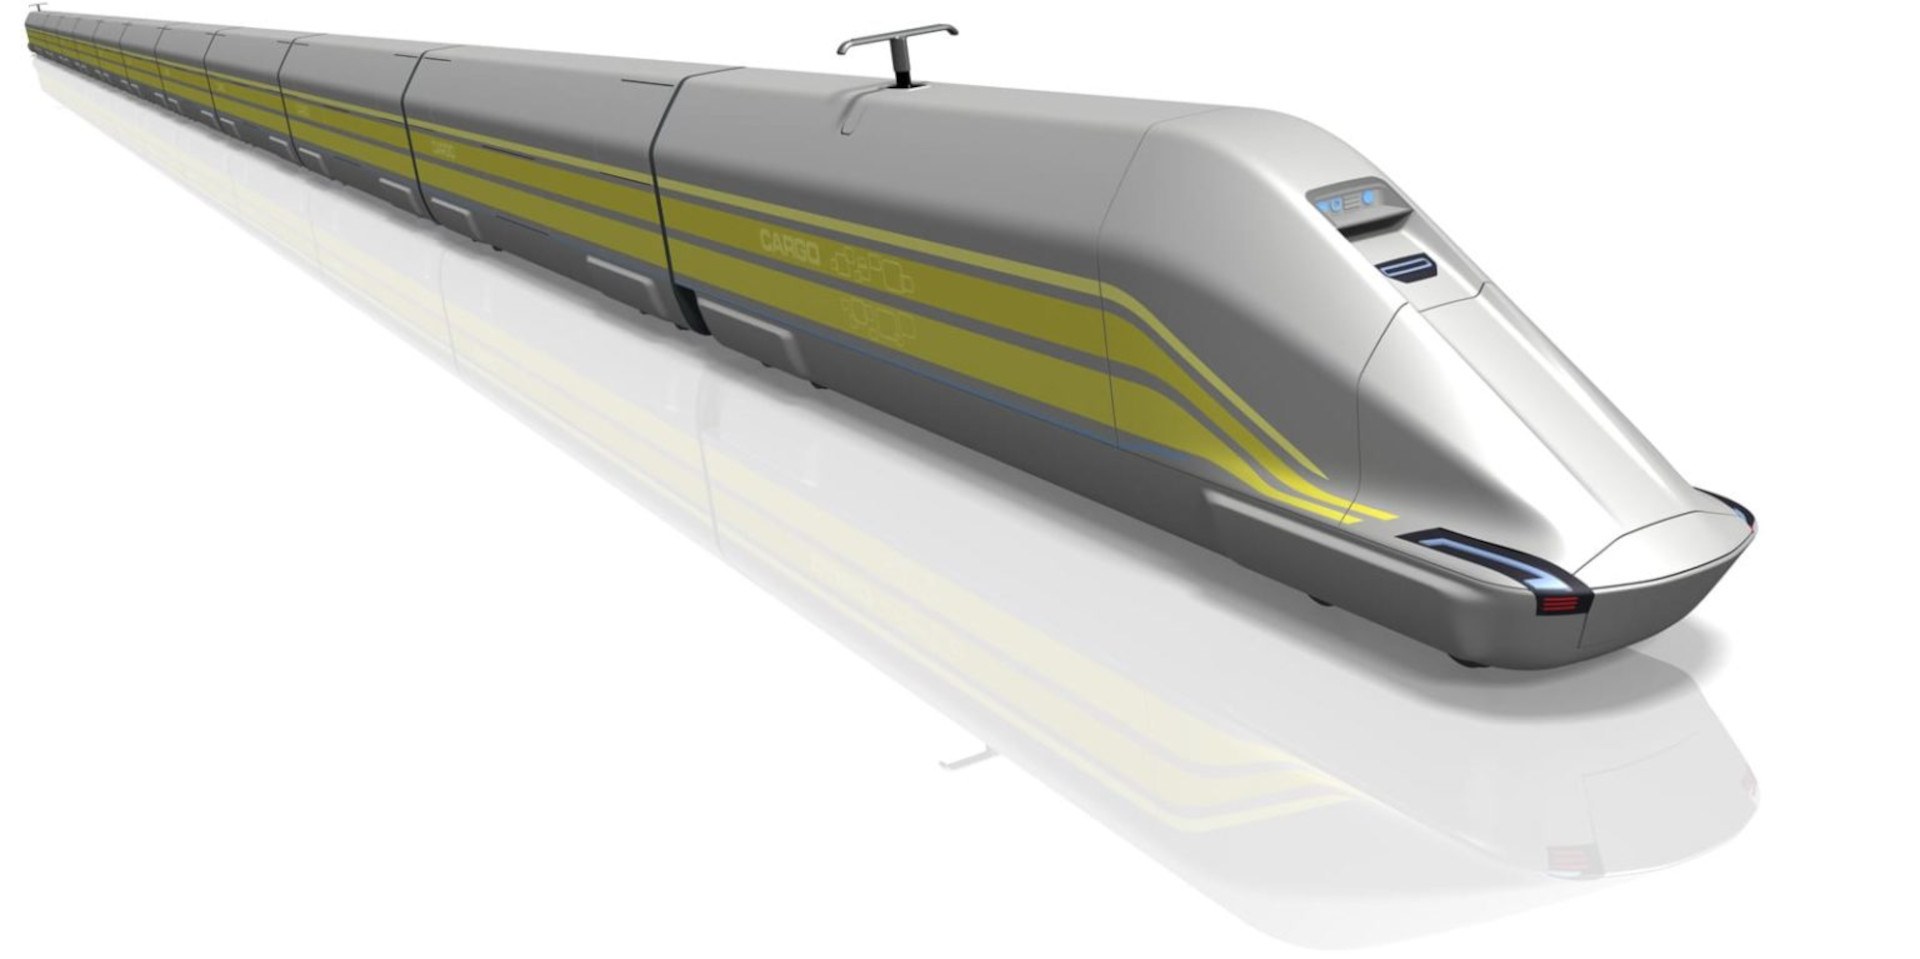 NGT Cargo – smart and automated goods train of the future